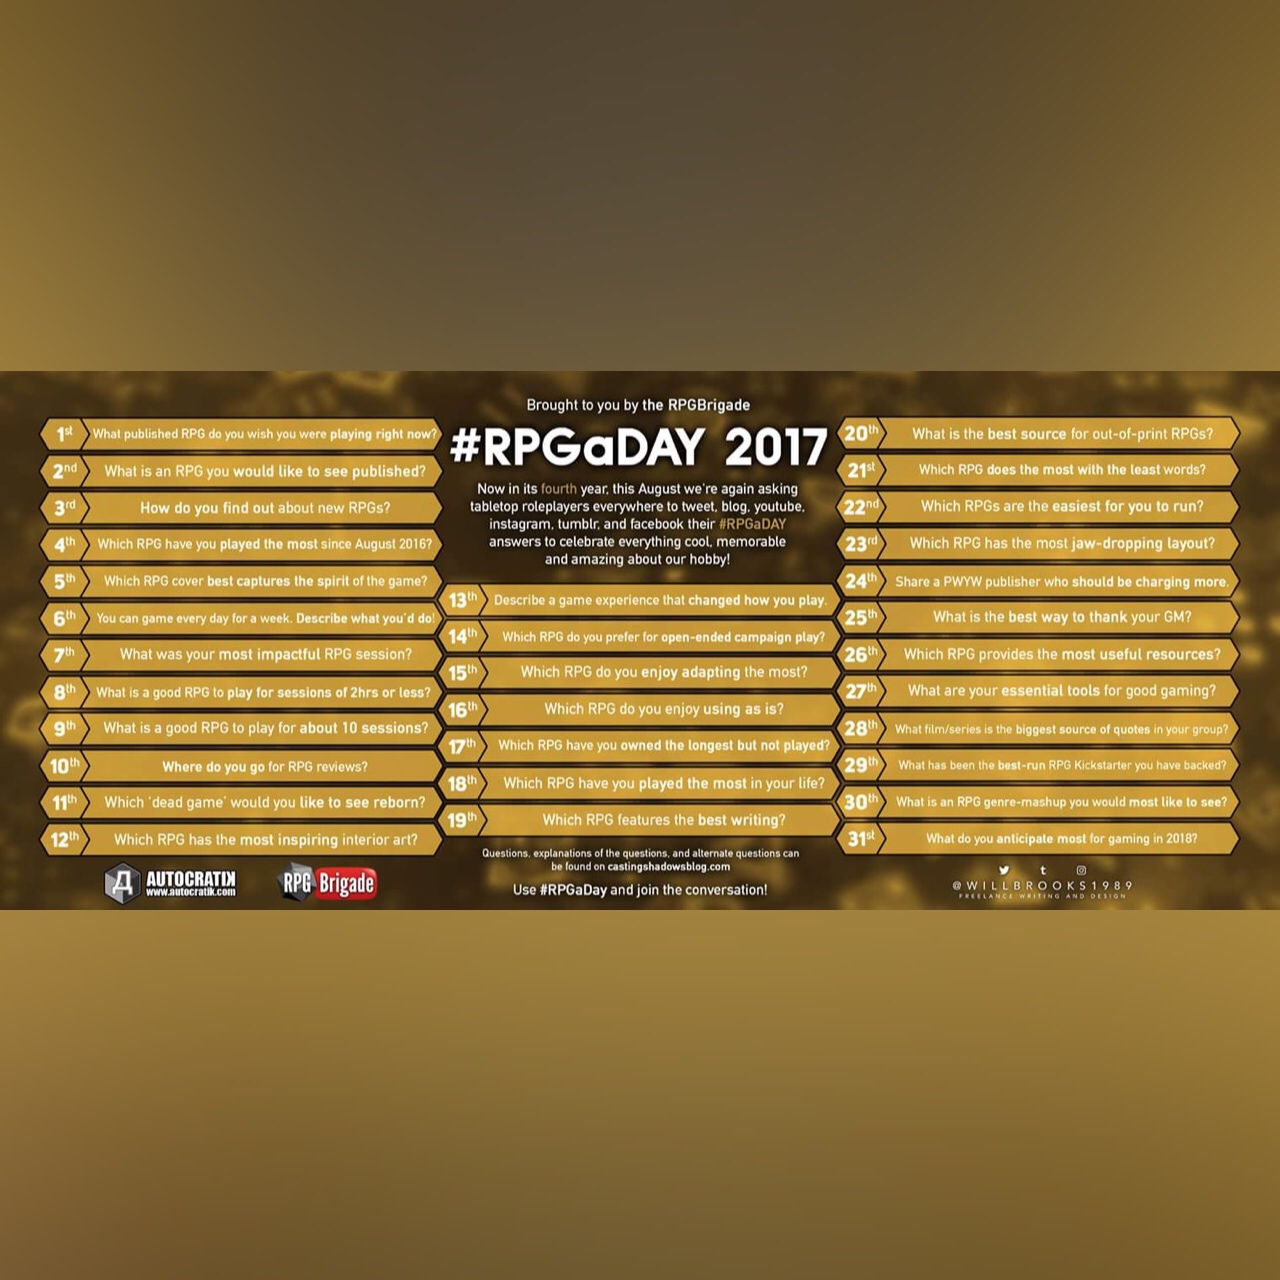 RPGaDAY 2017 August 2nd What is an RPG you would like to see Published?